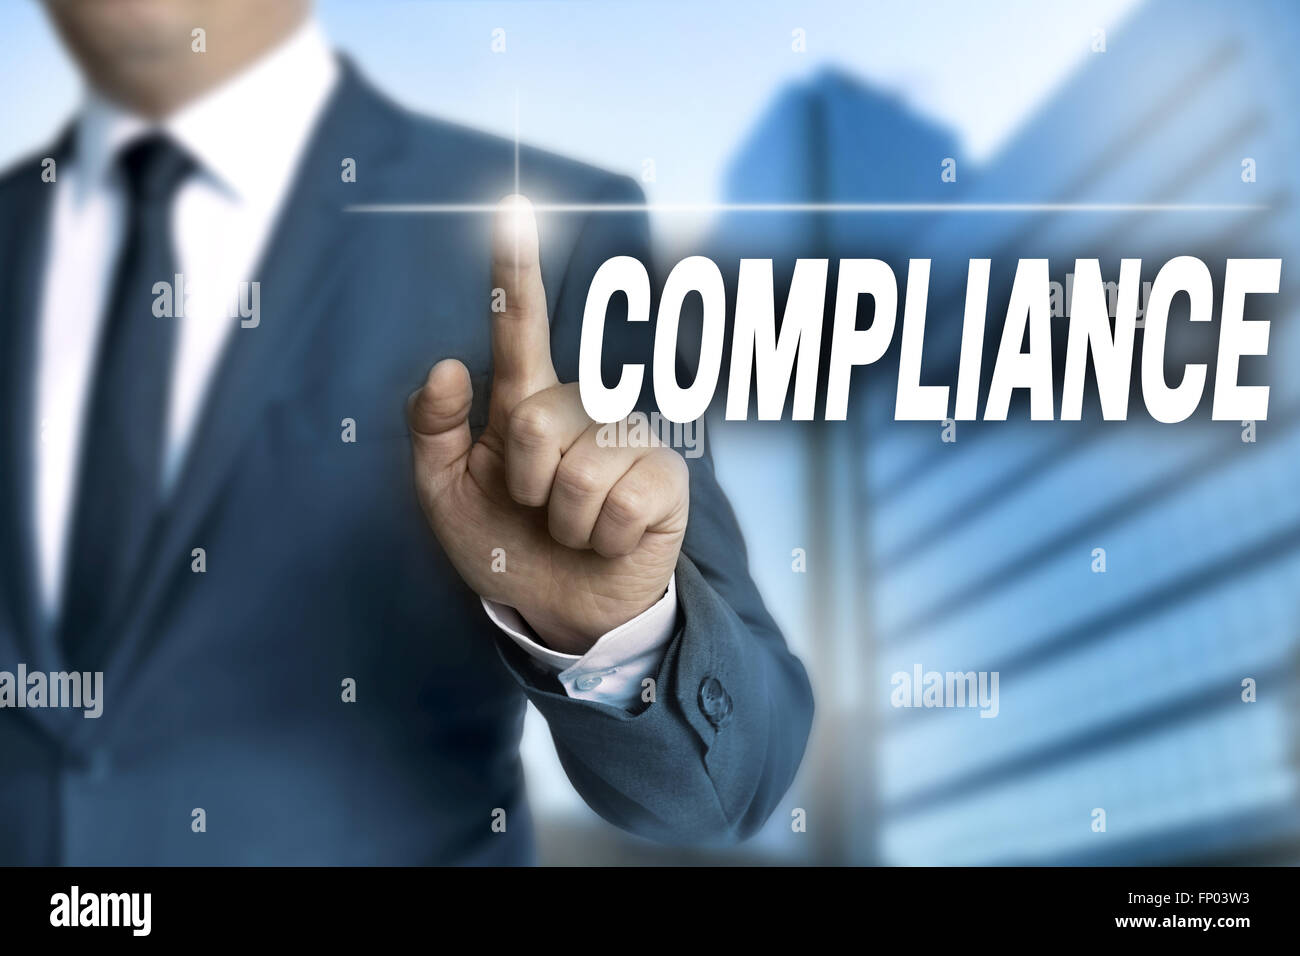 compliance touchscreen is operated by businessman. Stock Photo